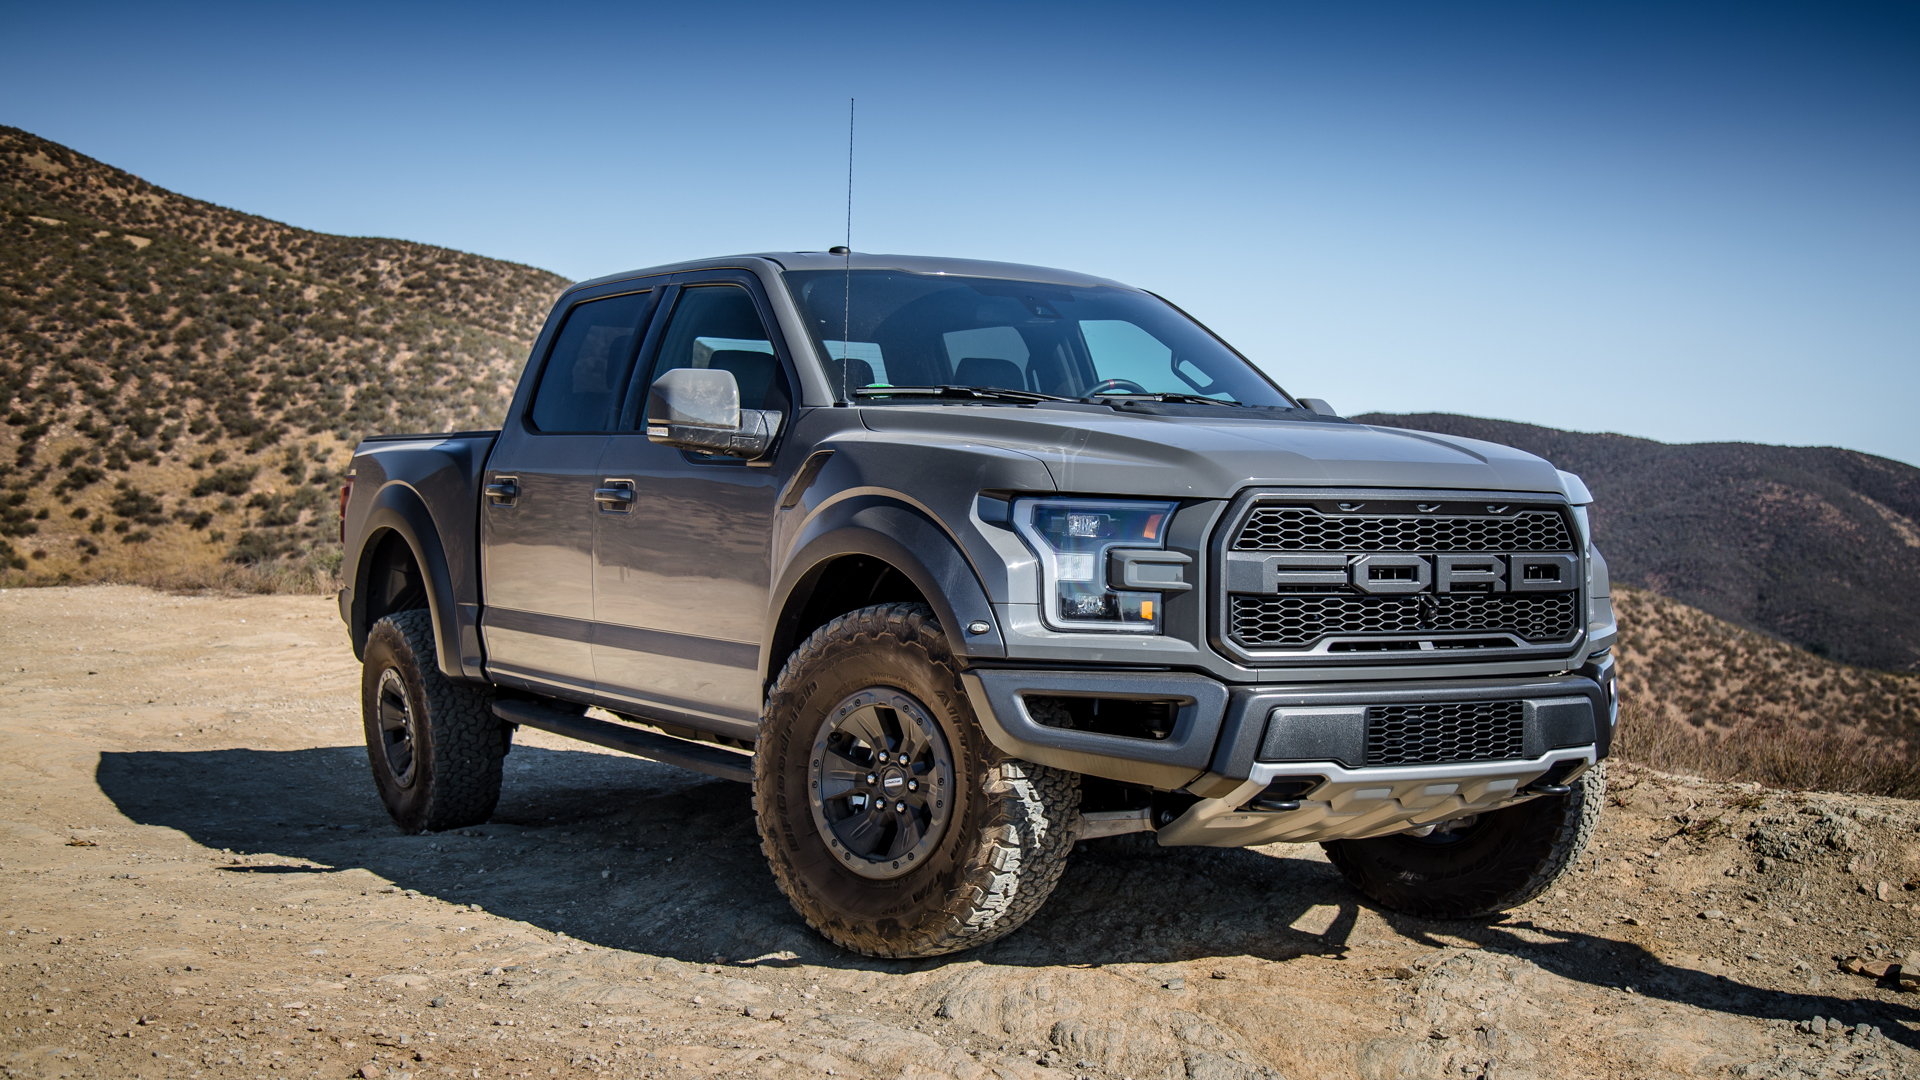 2019 Ford F 150 Raptor Review Caradvice.